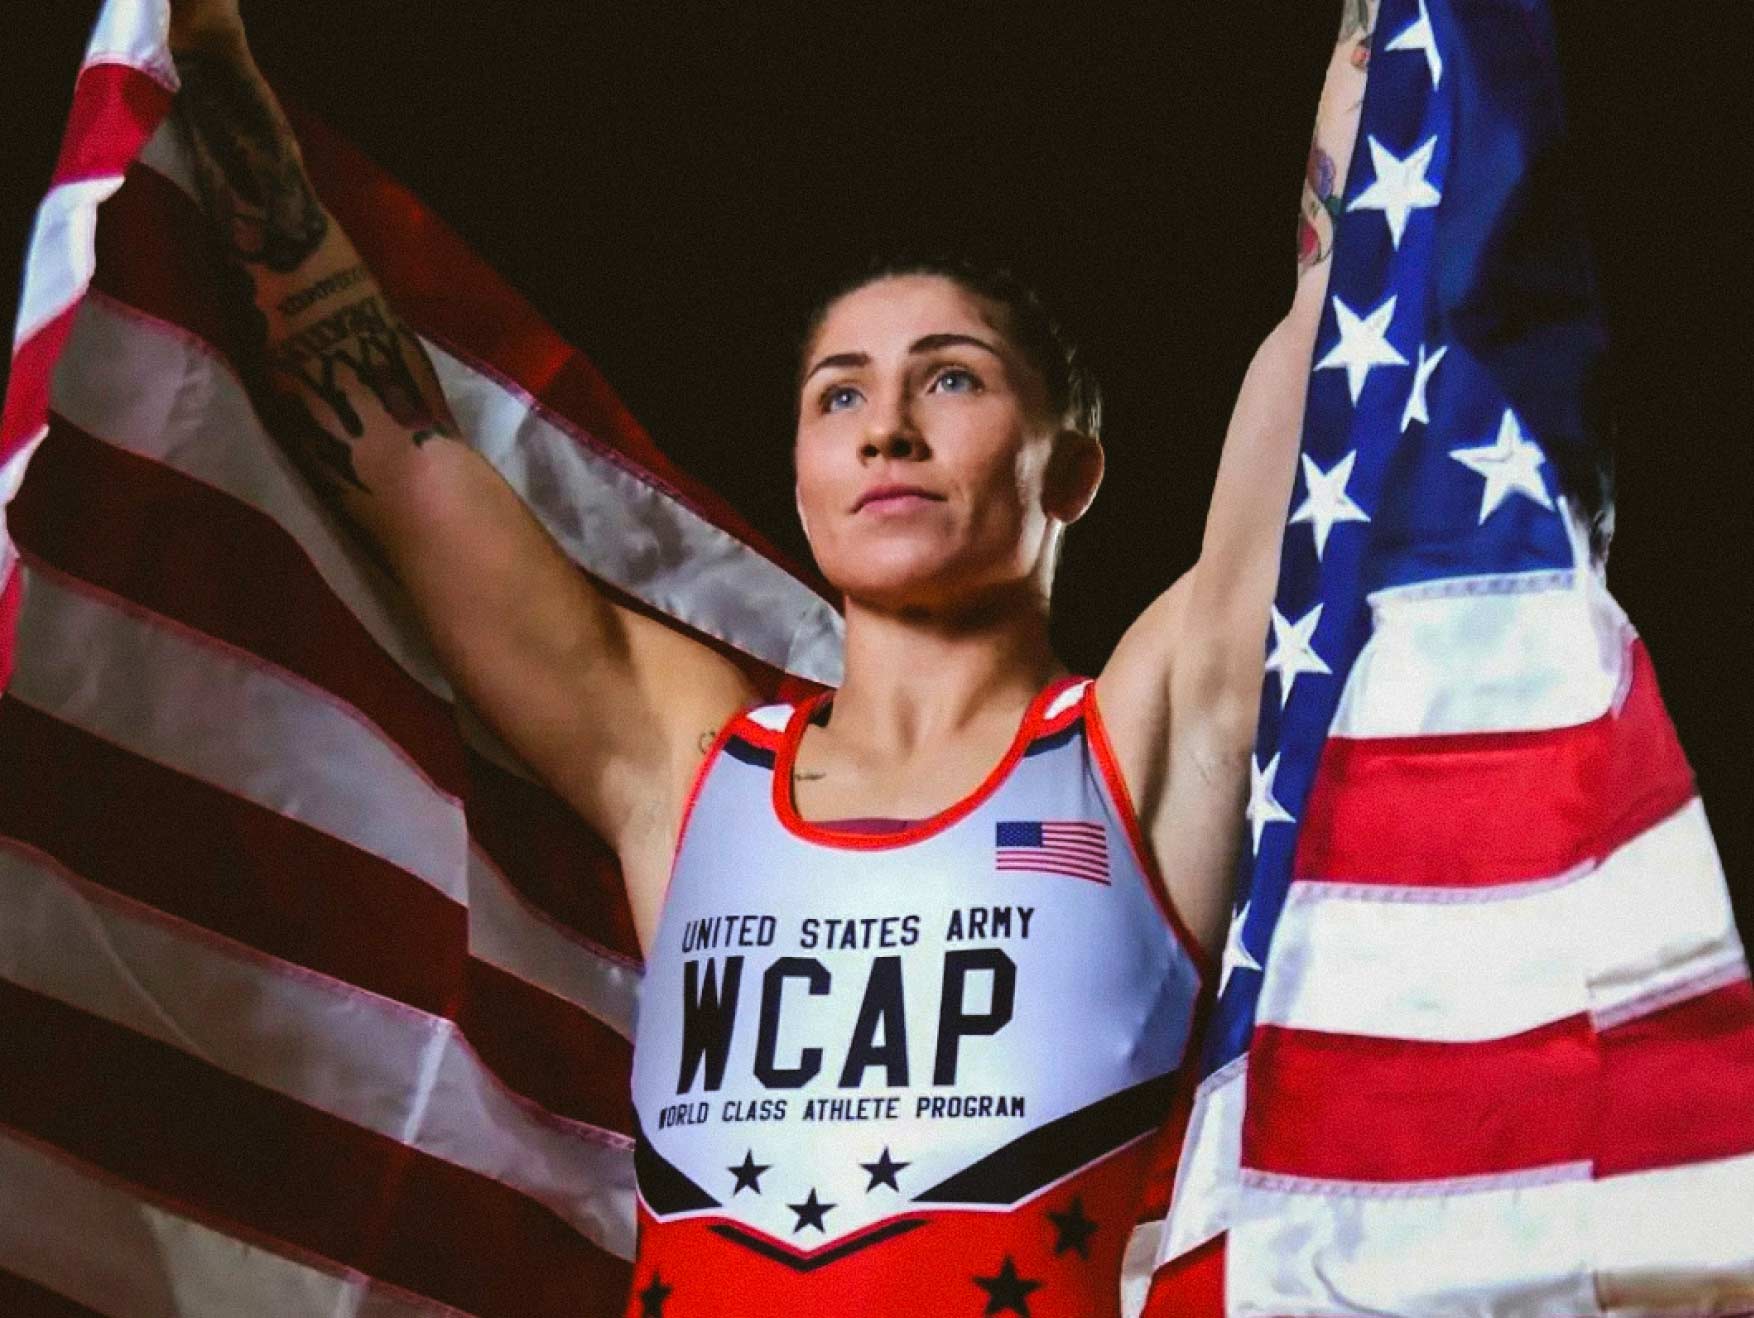 A female World Class Athlete standing and holding a US Flag behind her